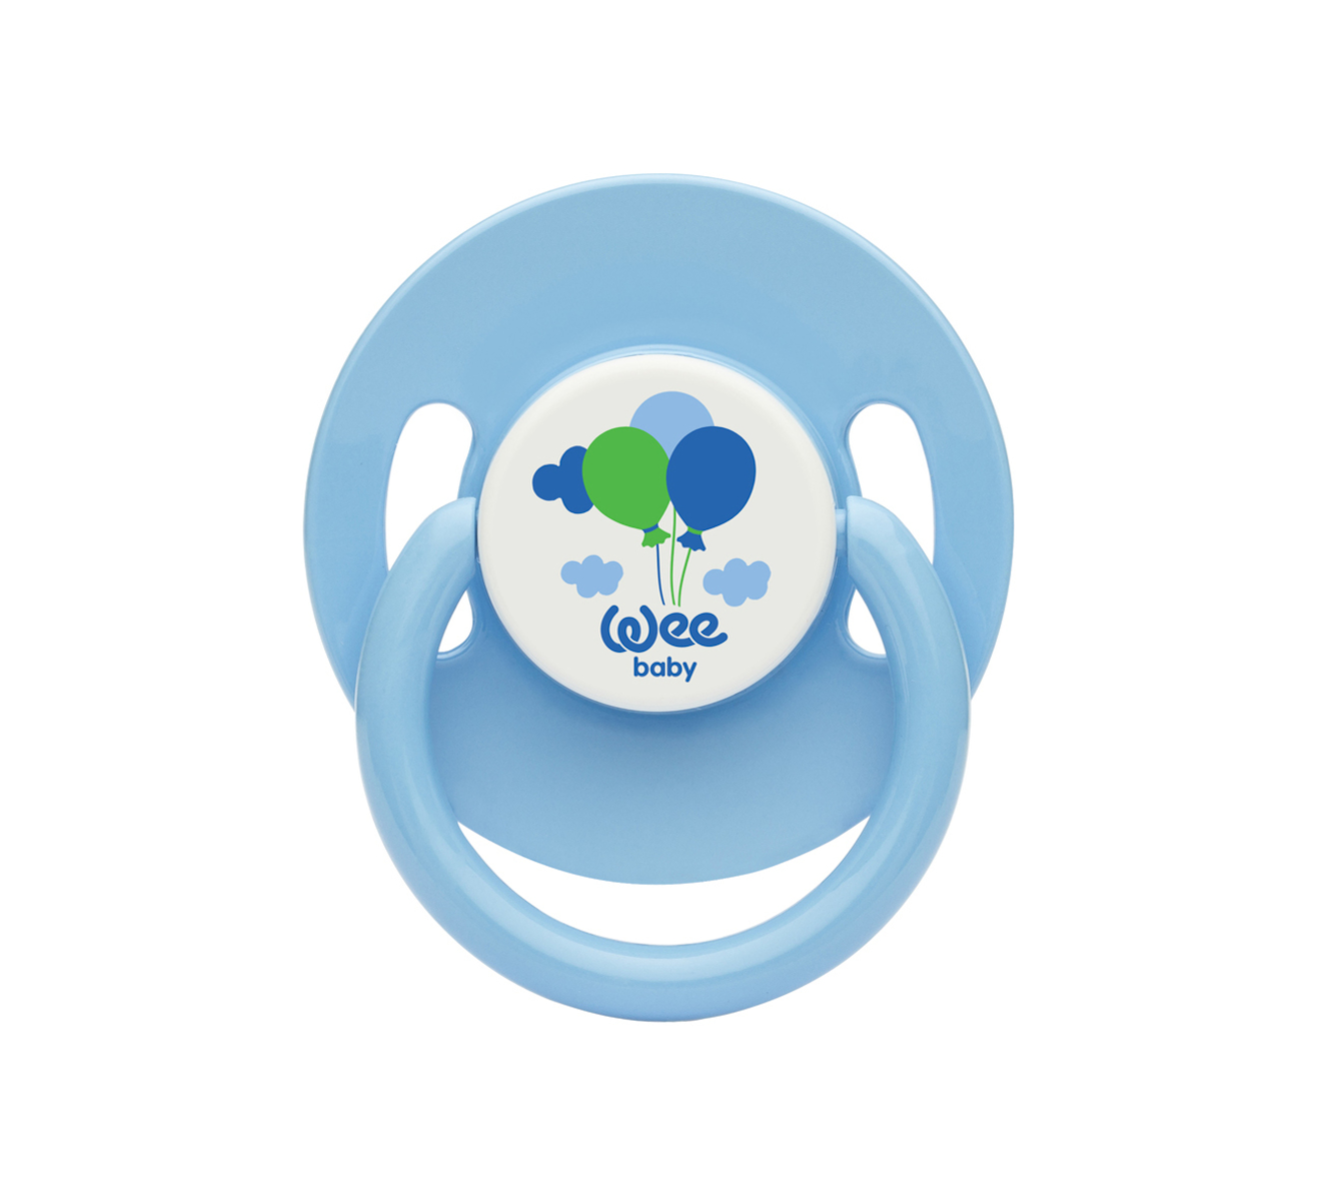 wee-baby-opaque-round-body-round-teat-soother-18-months